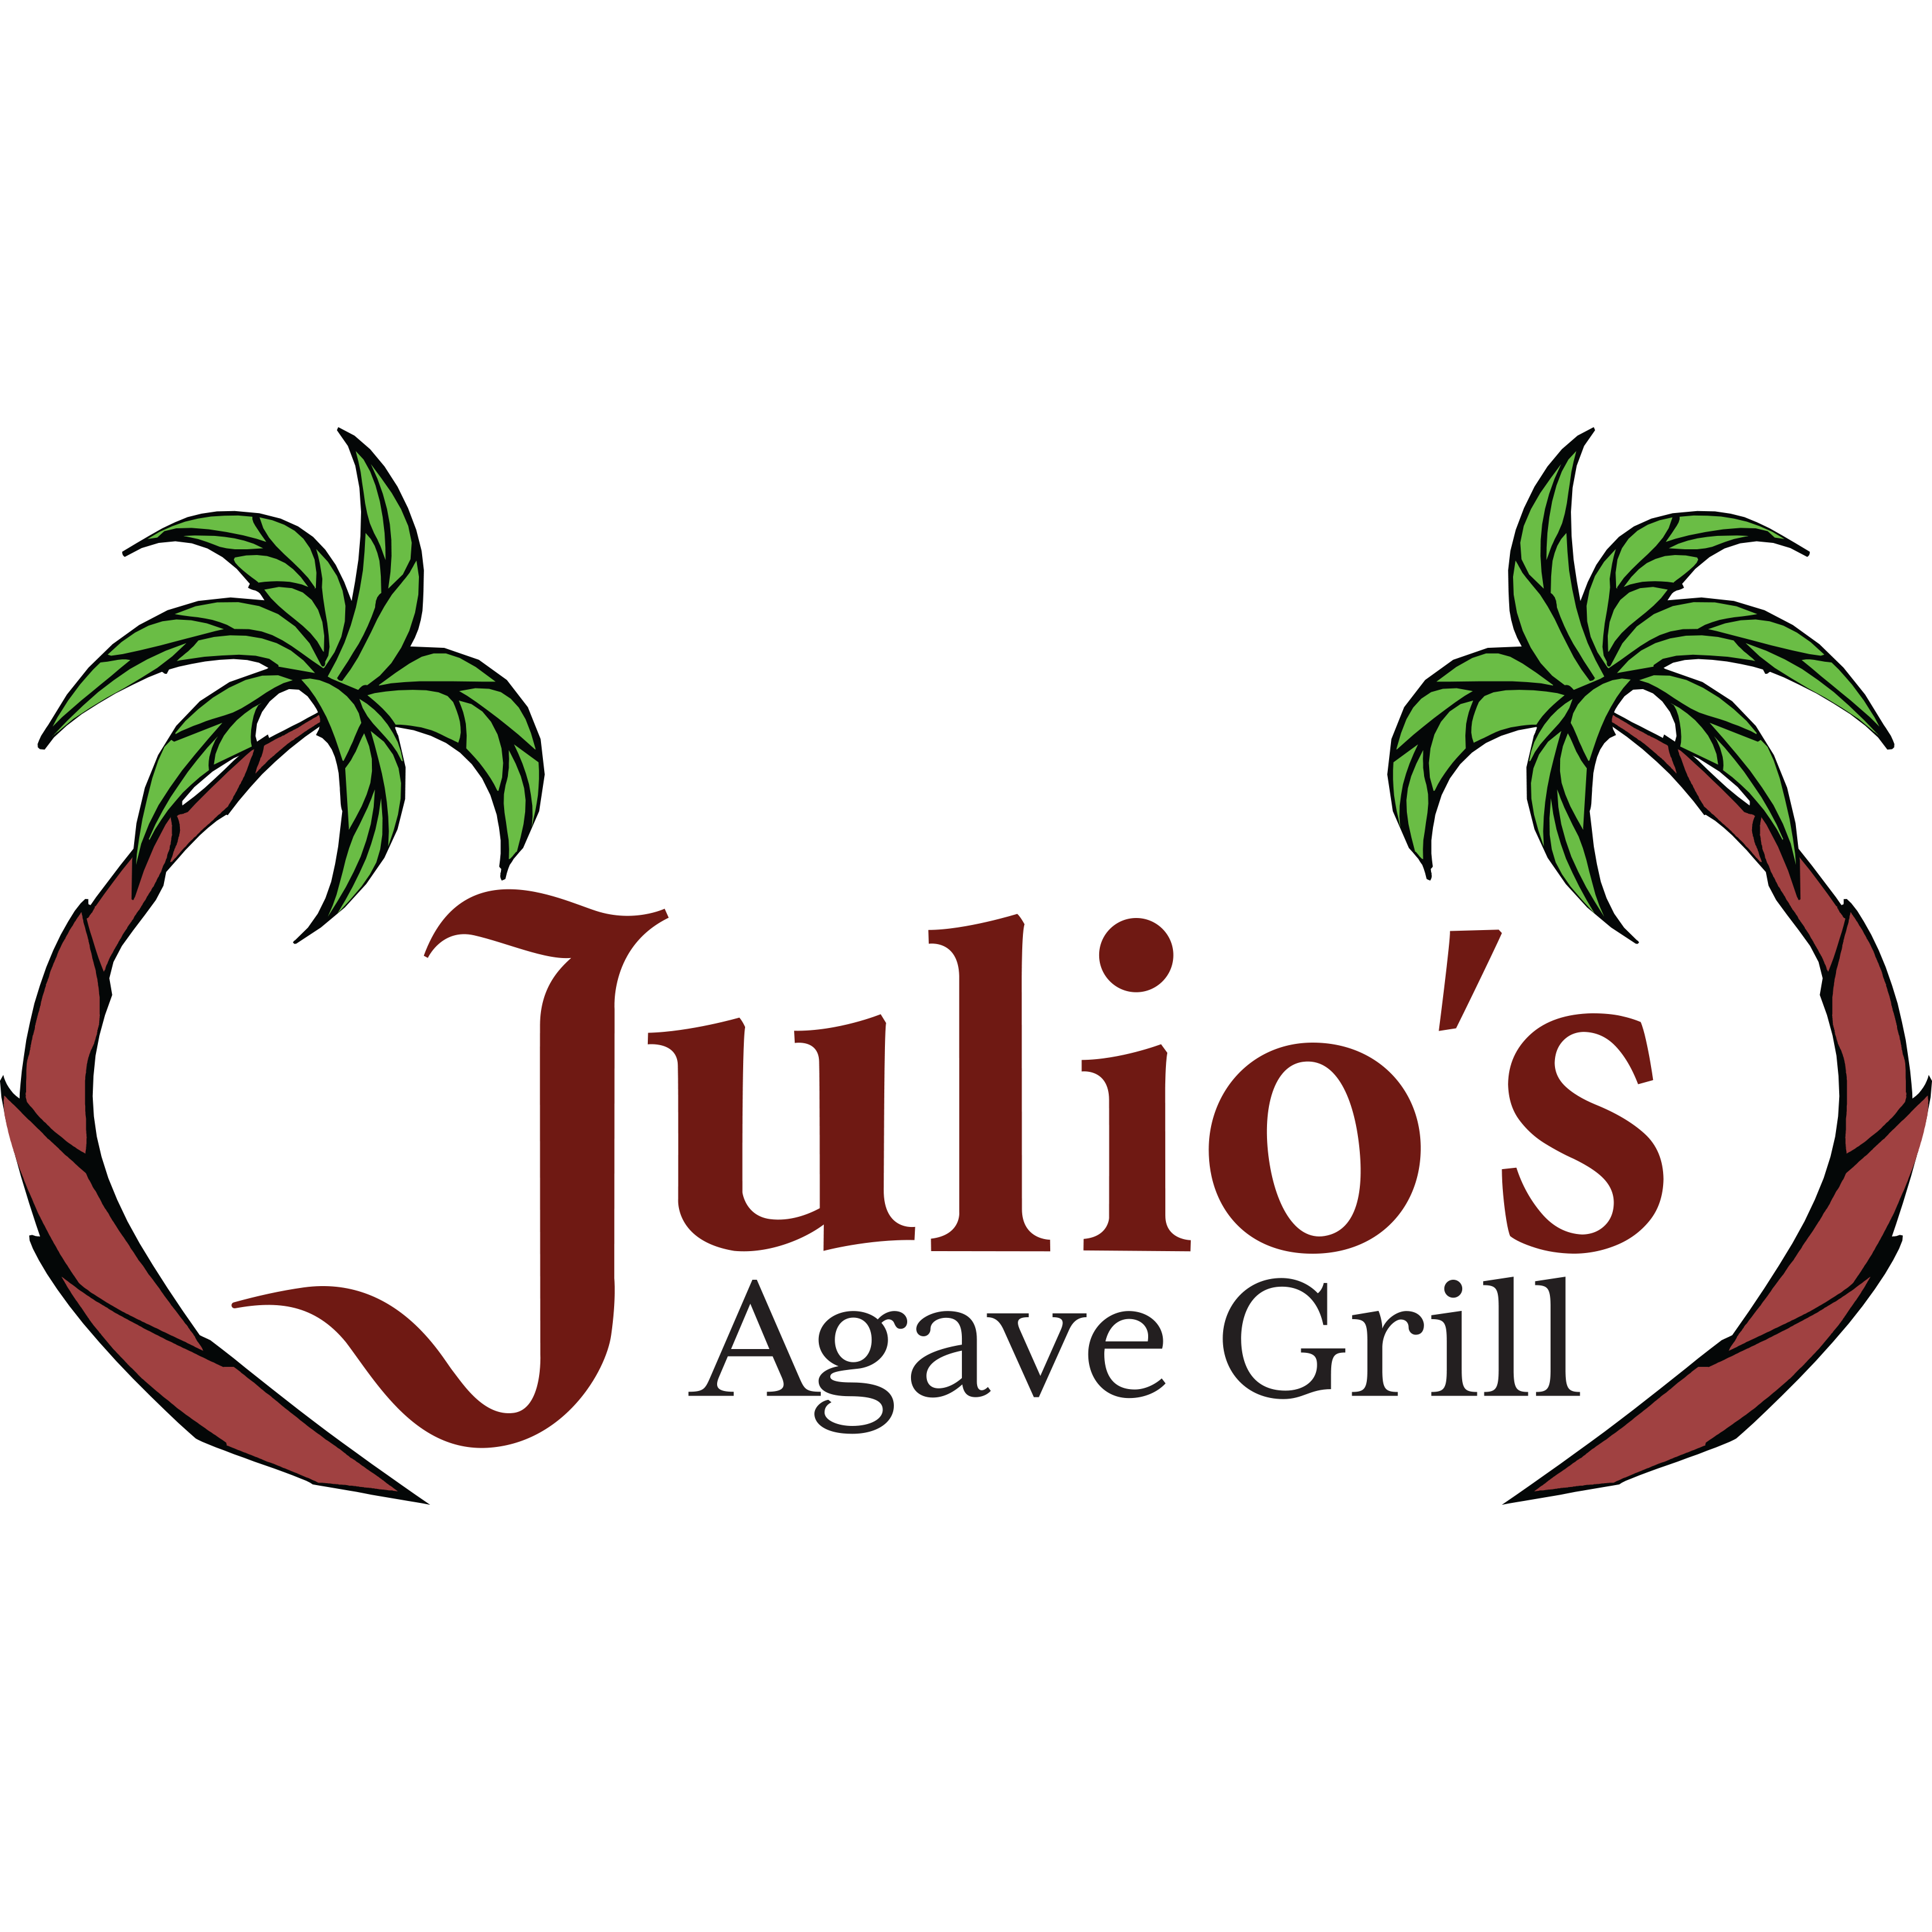 Julio's  Agave Grill Logo